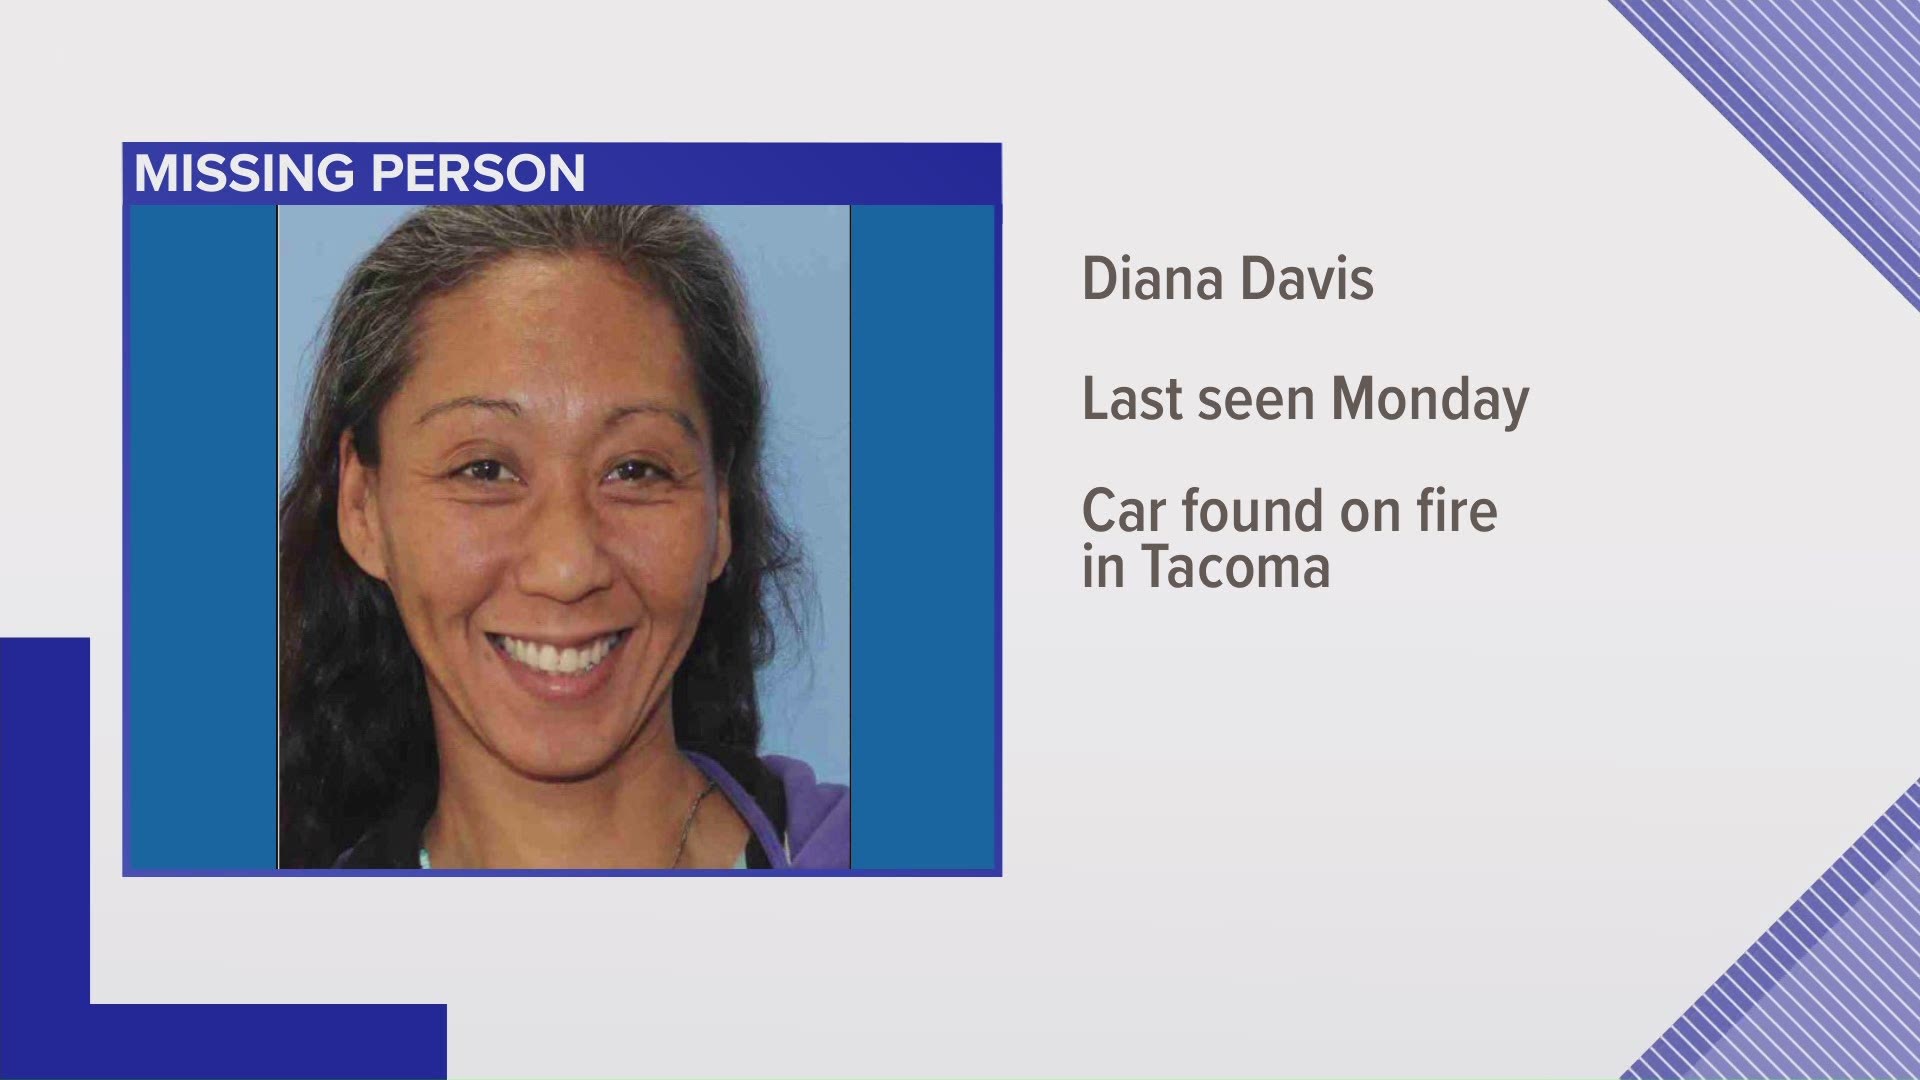 Tacoma Police are looking for Diana Davis, who was been missing under "suspicious circumstances" since July 27.